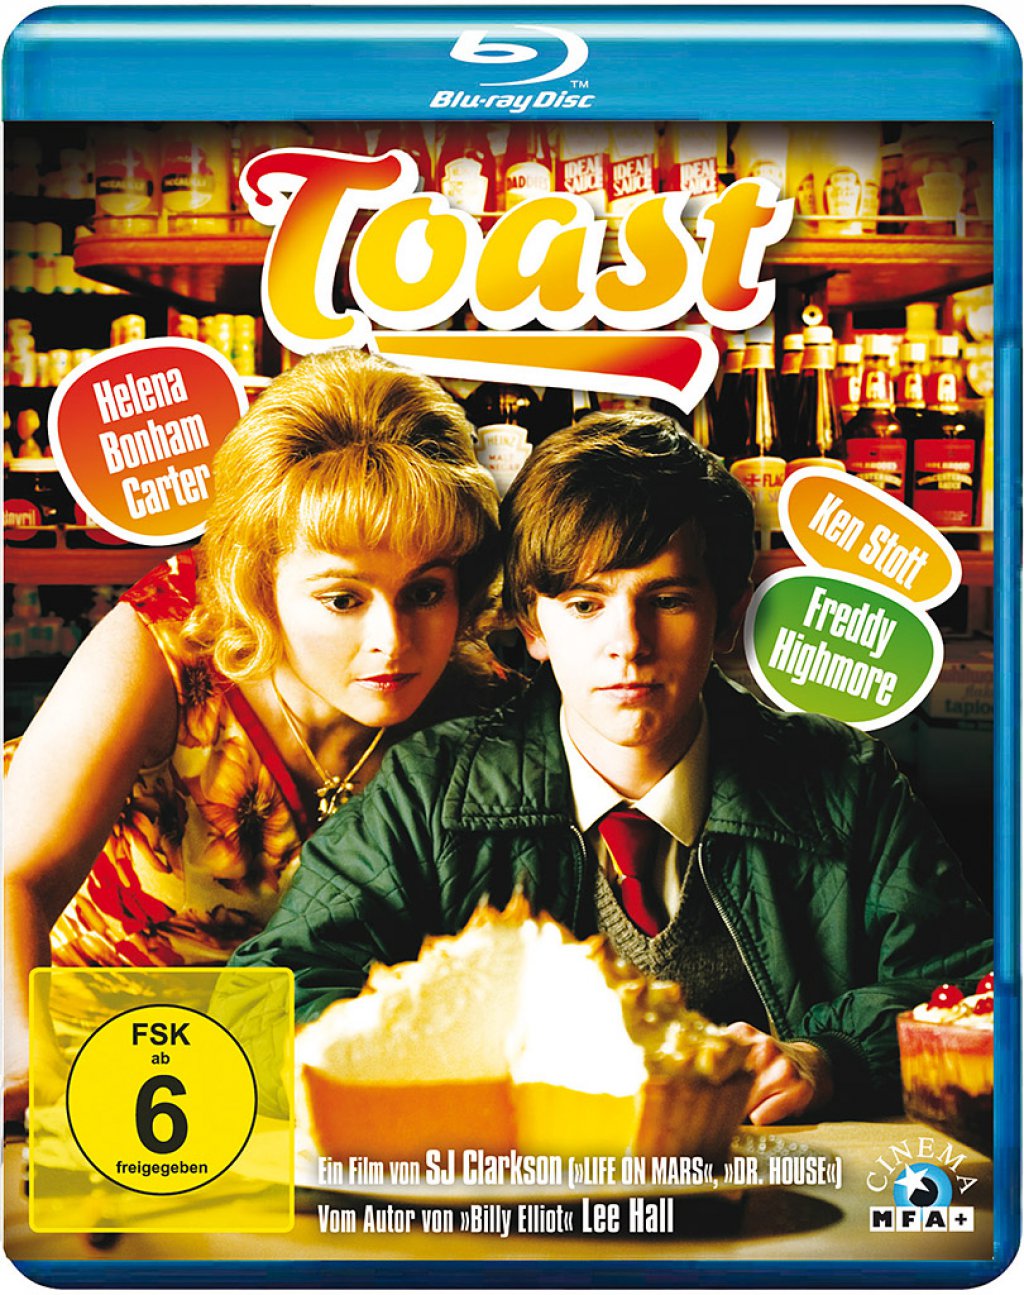 toast dvd for mac